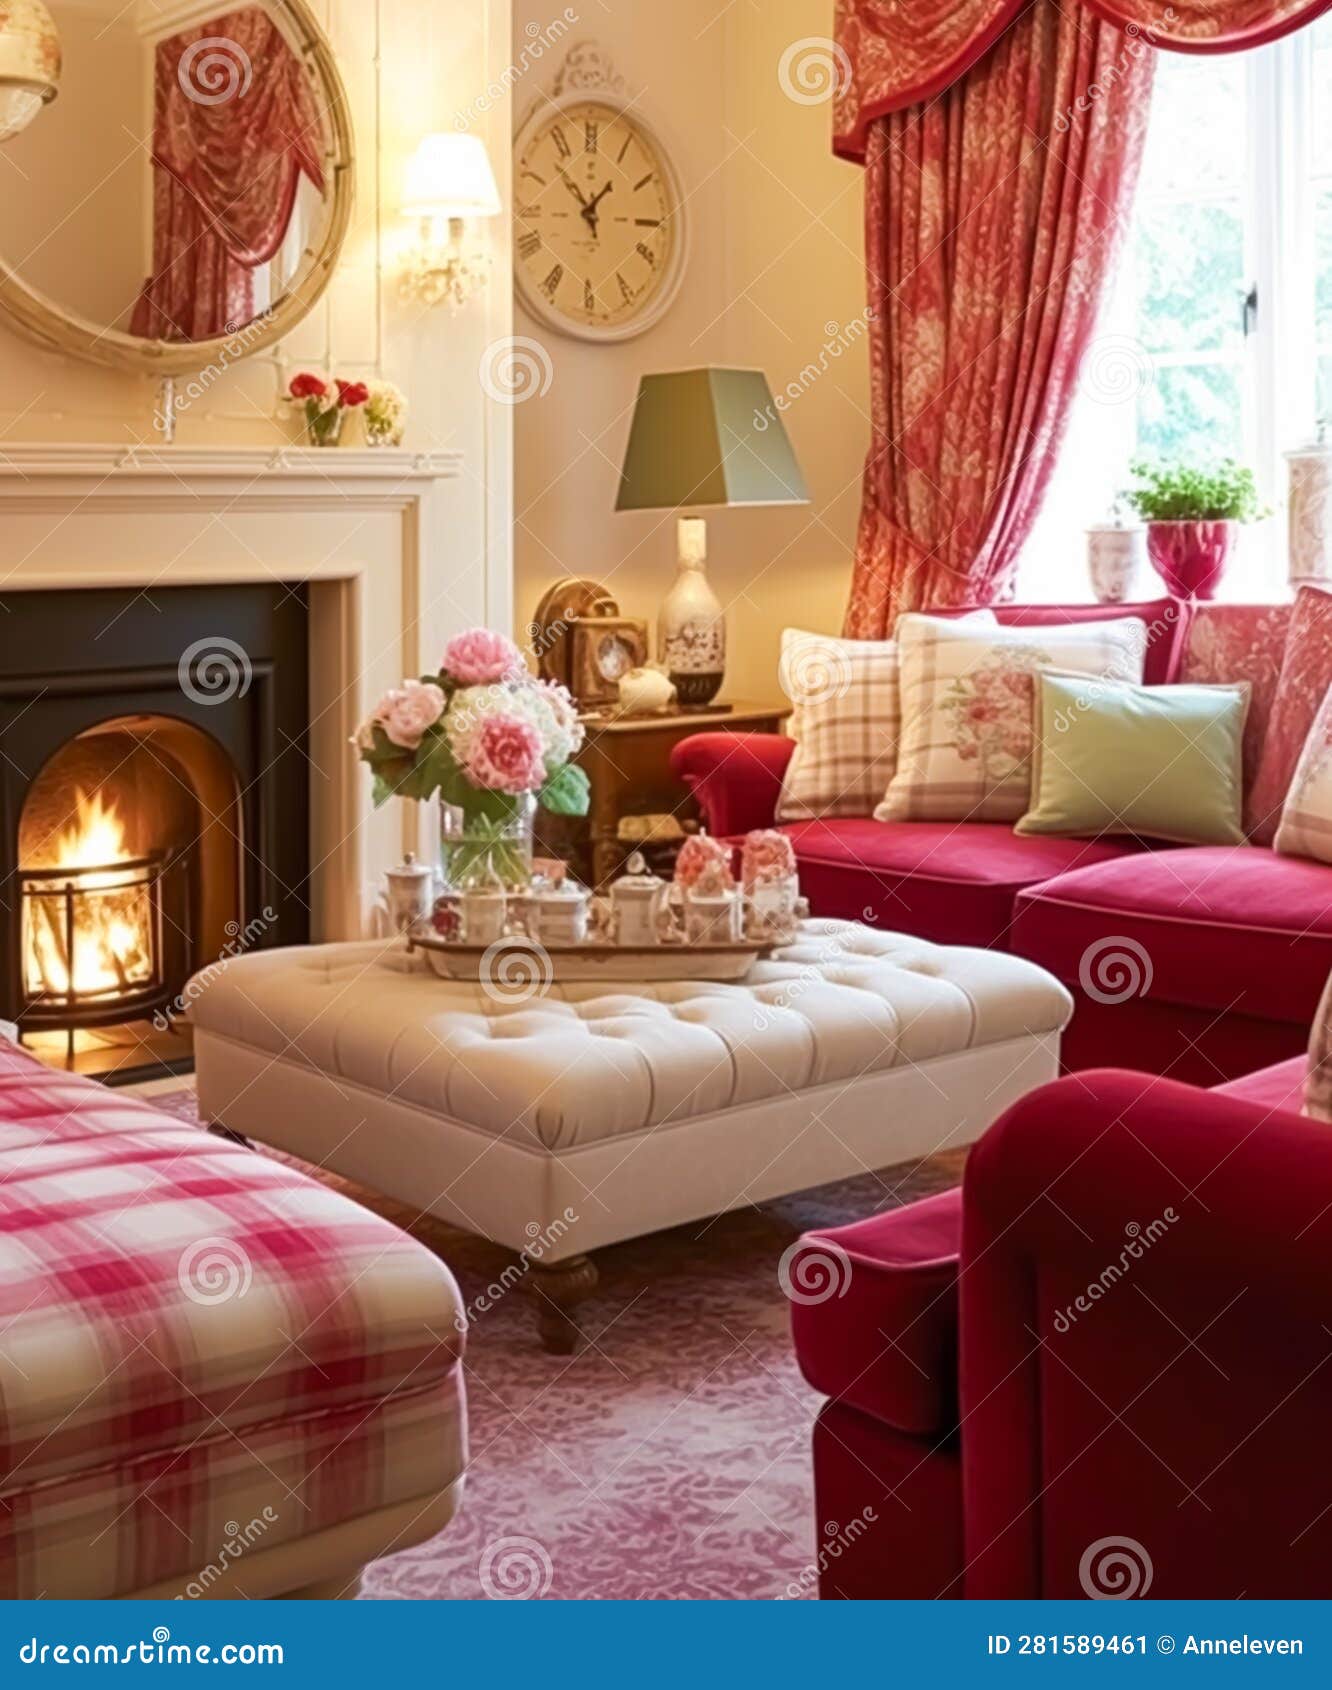 https://thumbs.dreamstime.com/z/traditional-sitting-room-decor-interior-design-red-pink-living-furniture-sofa-home-english-country-house-elegant-cottage-281589461.jpg